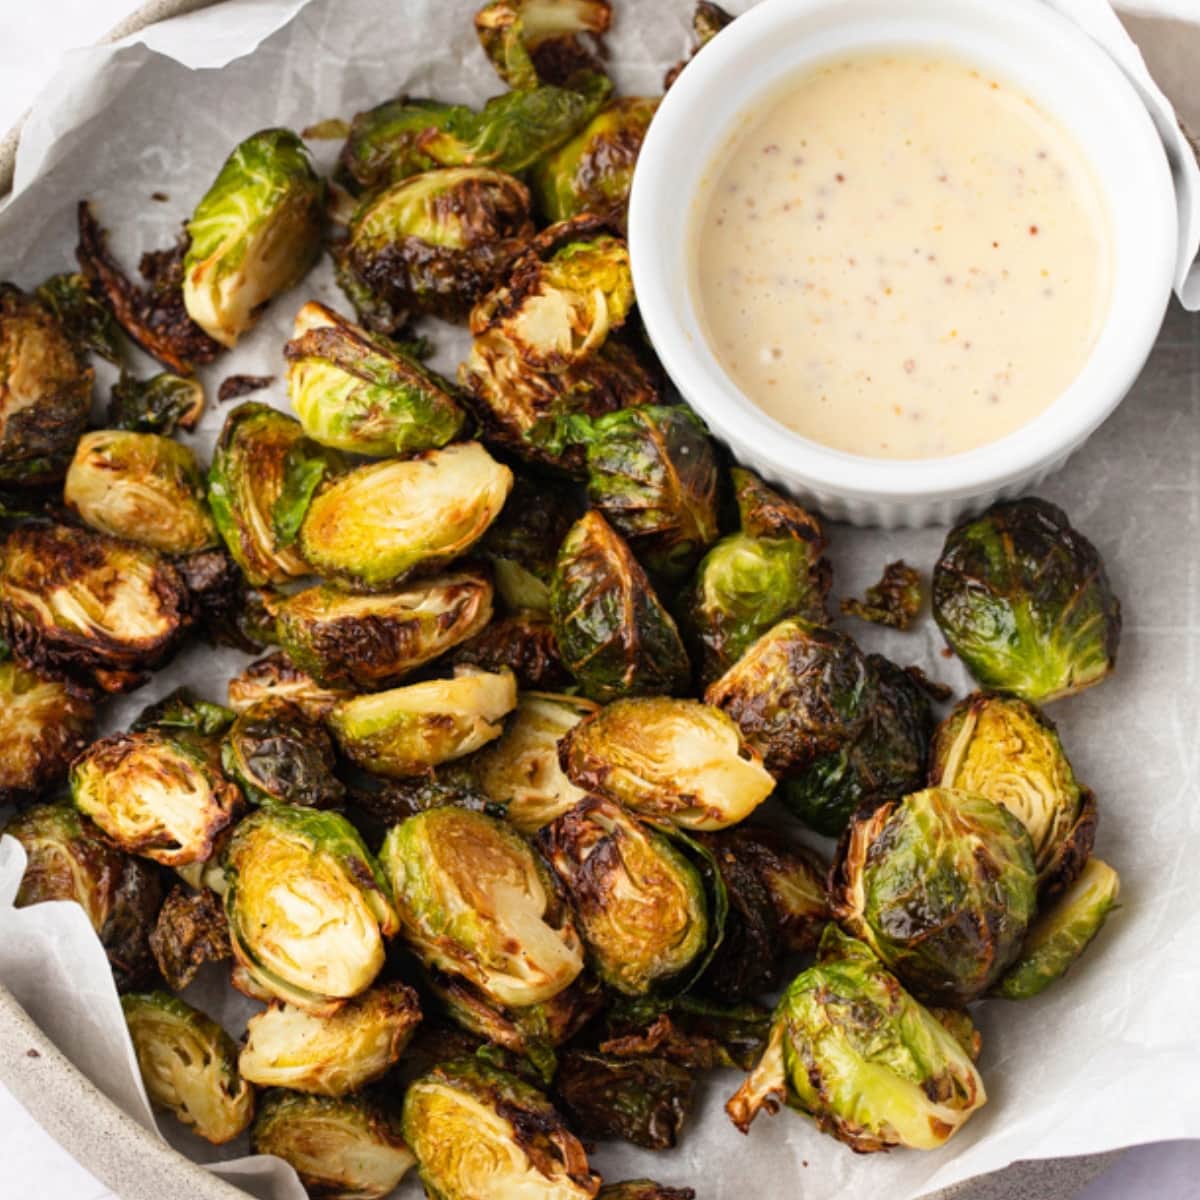 Bunch of roasted brussels sprouts on a plate with dipping sauce.